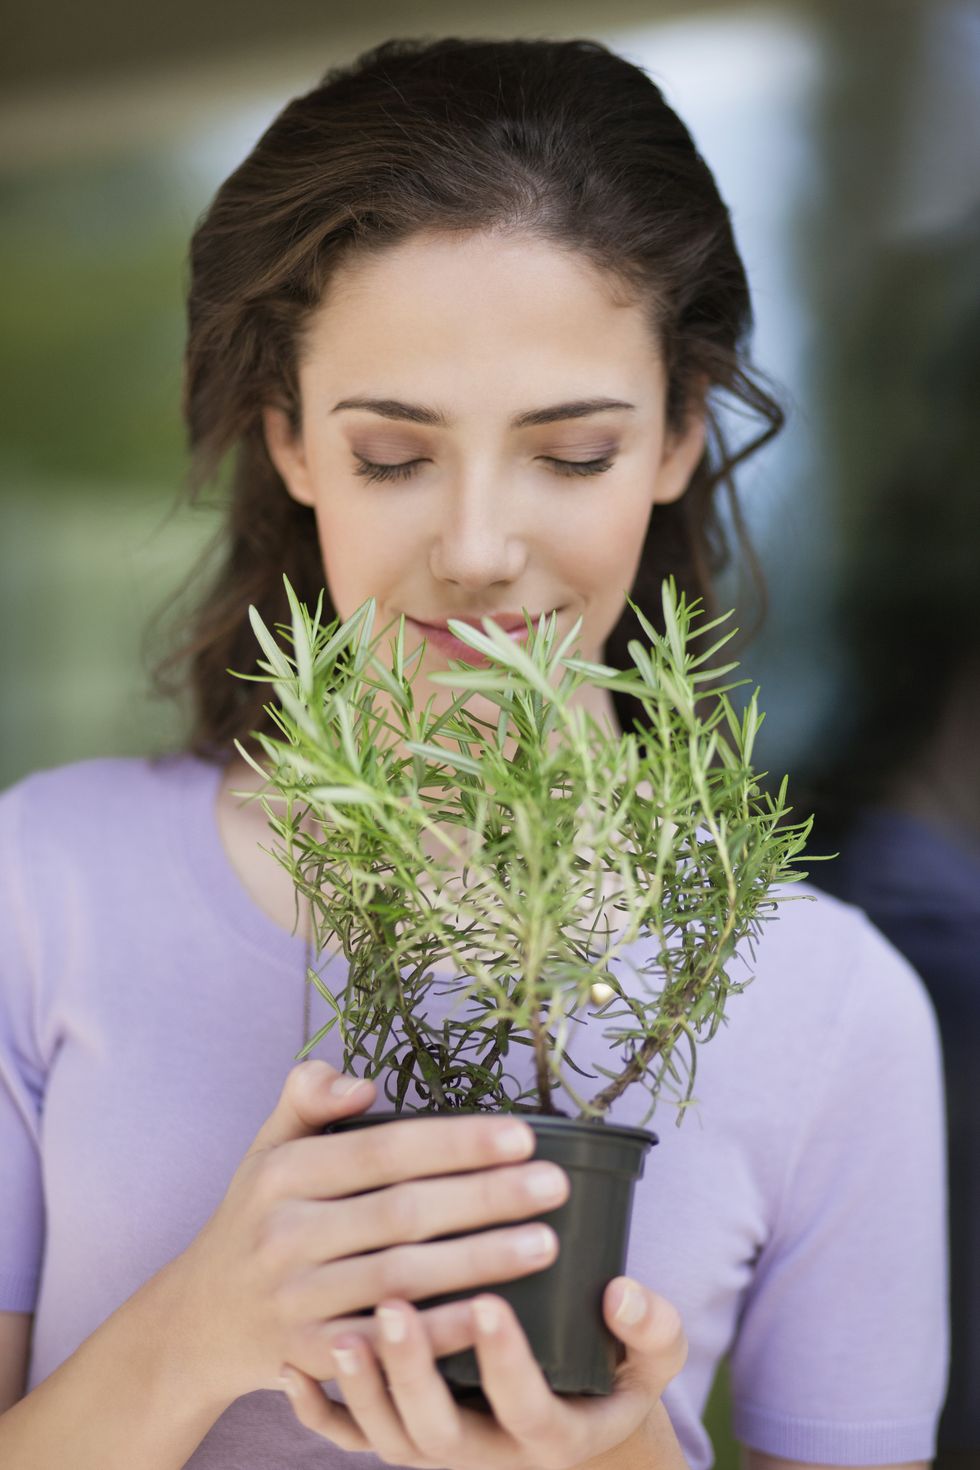 Woman smelling a rosemary plant